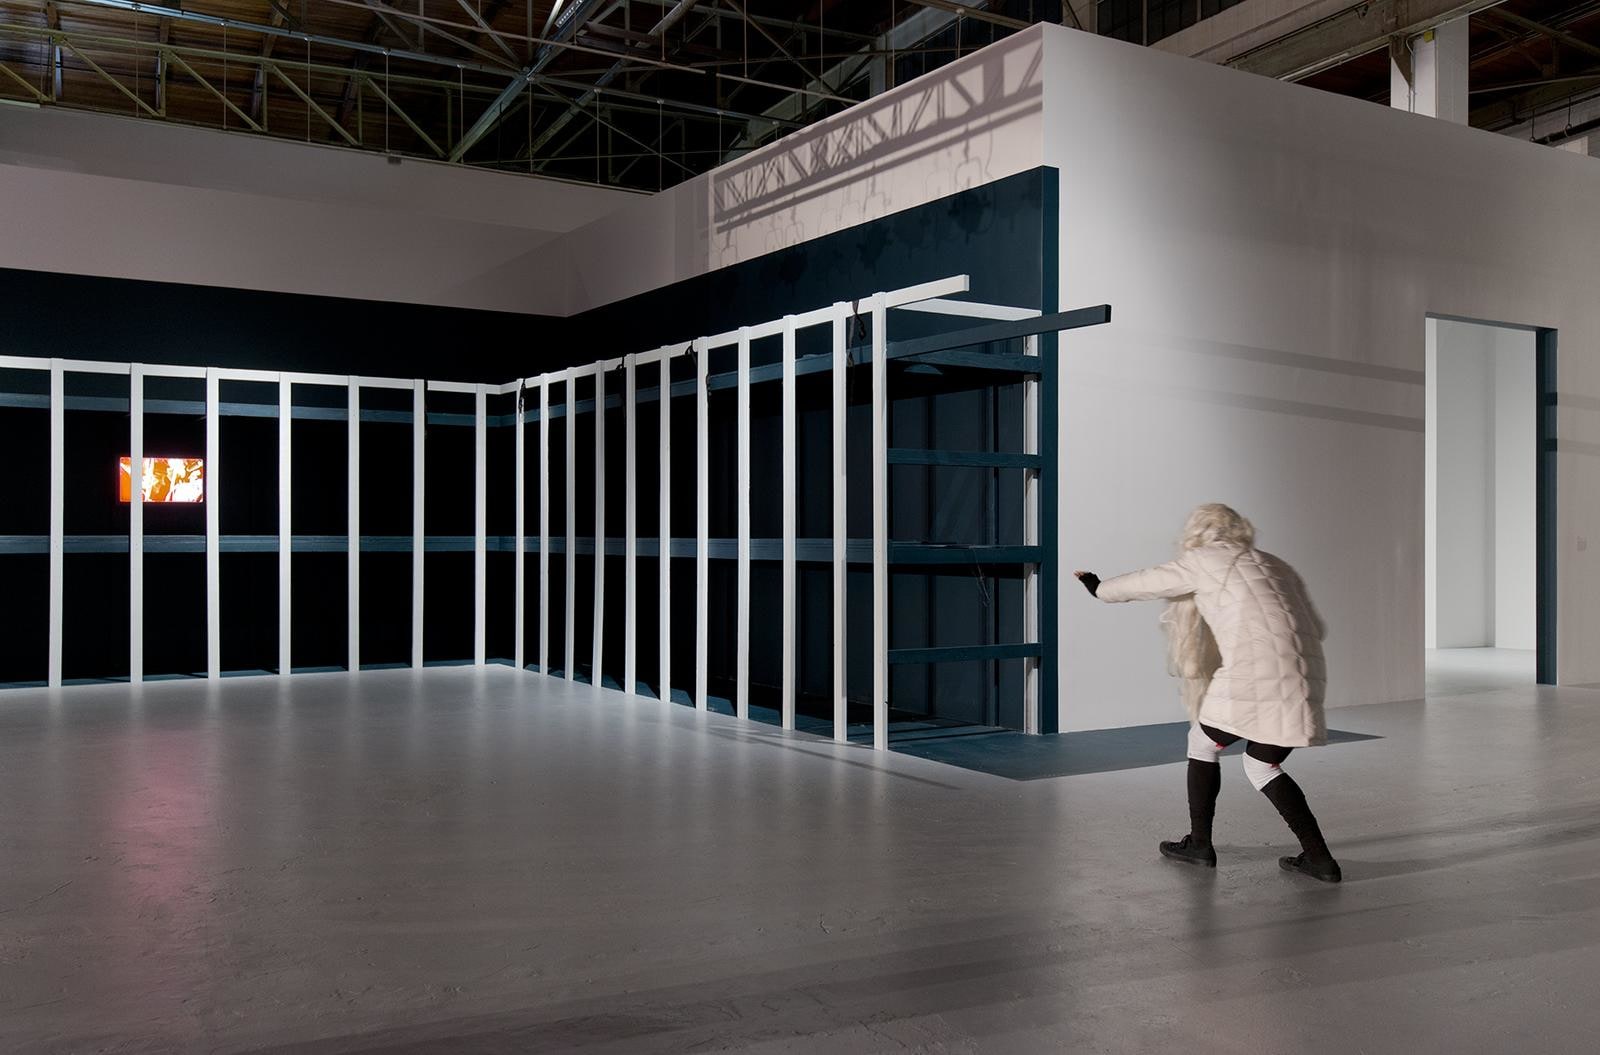  Installation view of William Pope.L: Trinket, March 20&ndash;June 28, 2015 at The Geffen Contemporary at MOCA, courtesy of the artist and The Museum of Contemporary Art, Los Angeles, photo by Brian Forrest